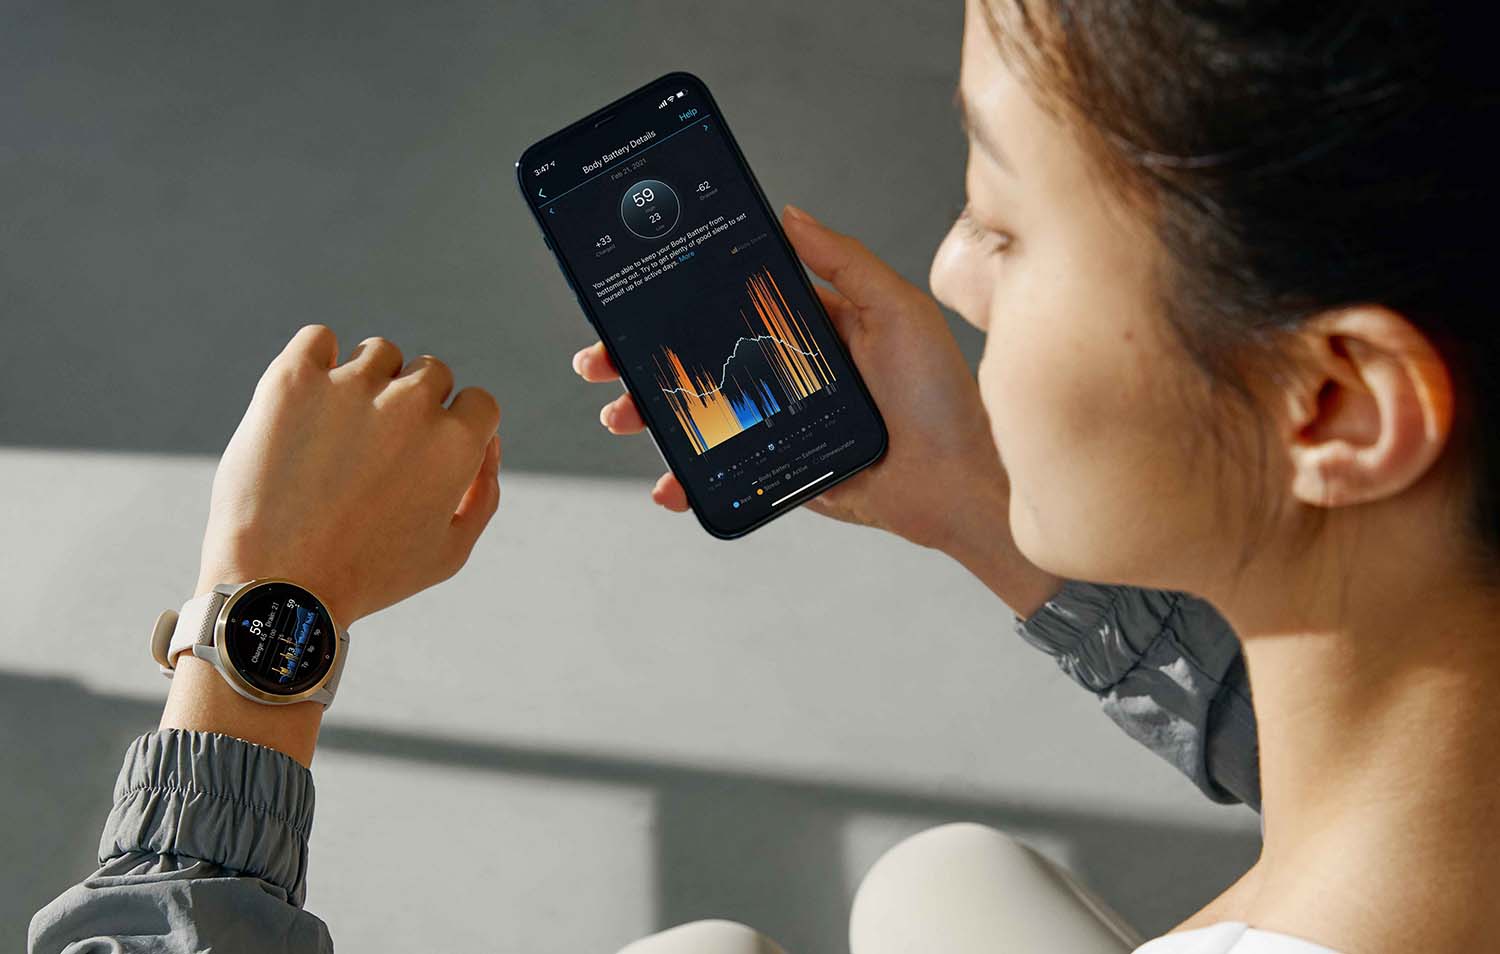 Work on a better you! Garmin champions overall wellness in style with the new Venu 2 series GPS smartwatches